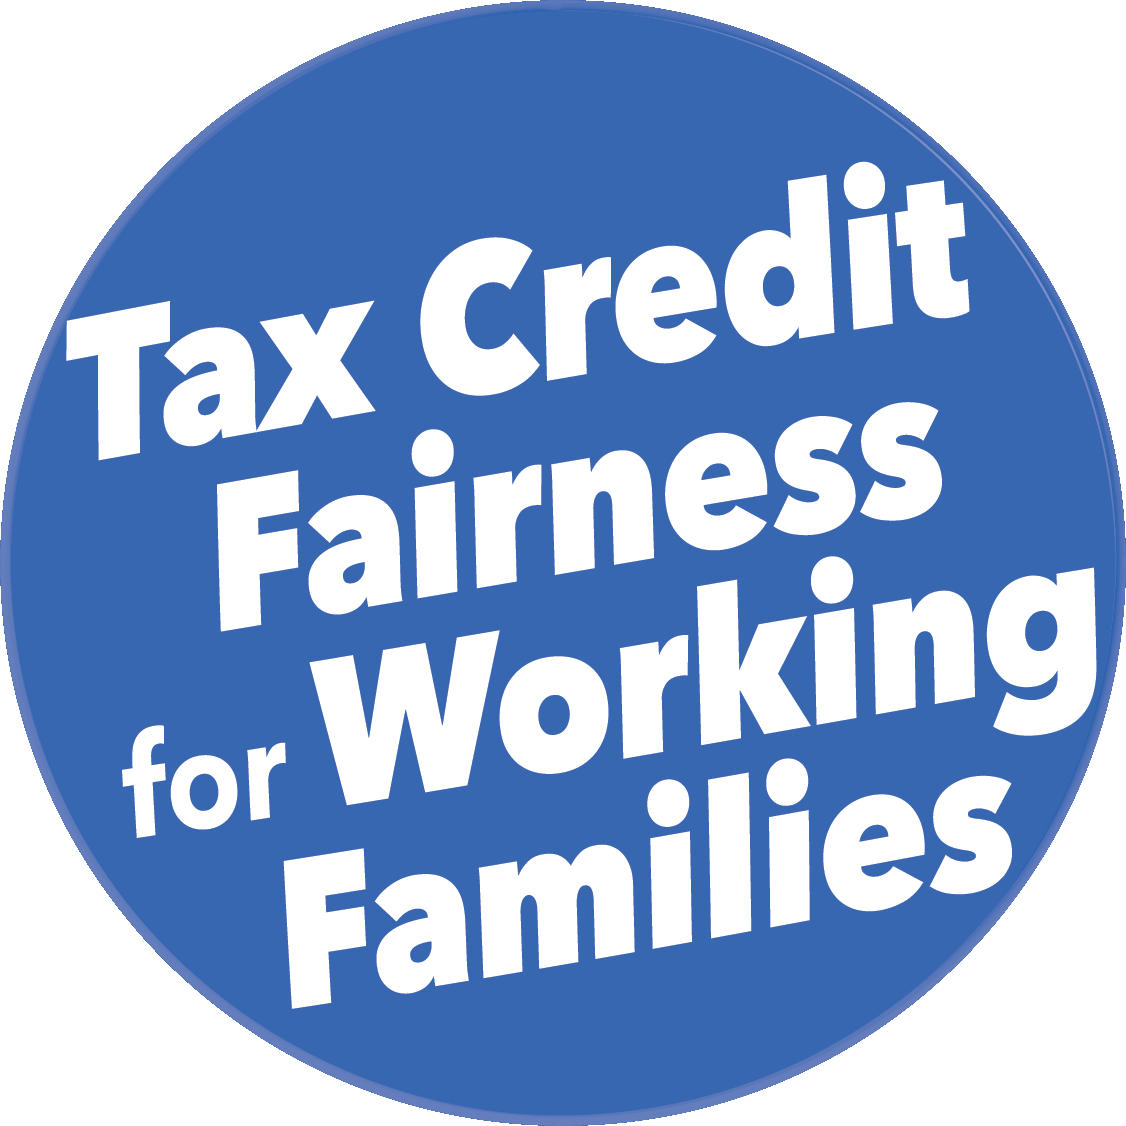 Tax Credit Fairness for Working Families